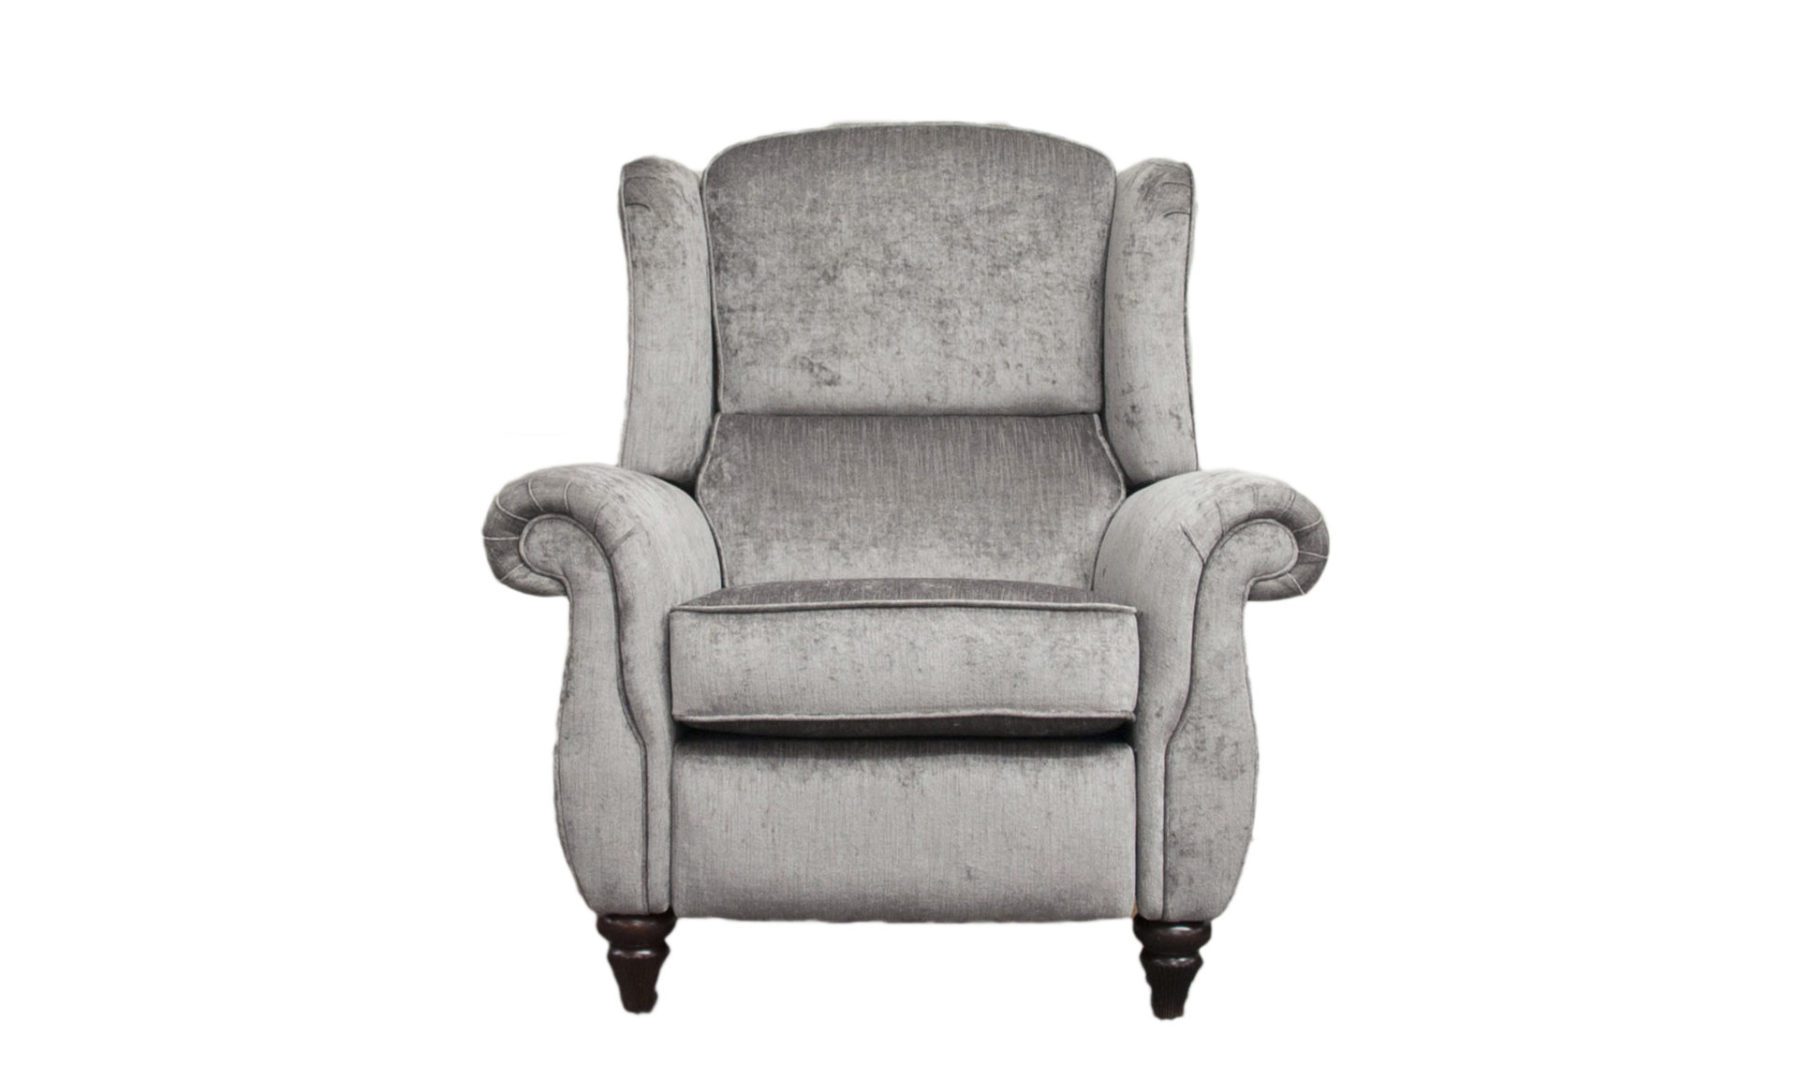 Greville Recliner in Edinburgh Truffle, Silver Collection Fabric 